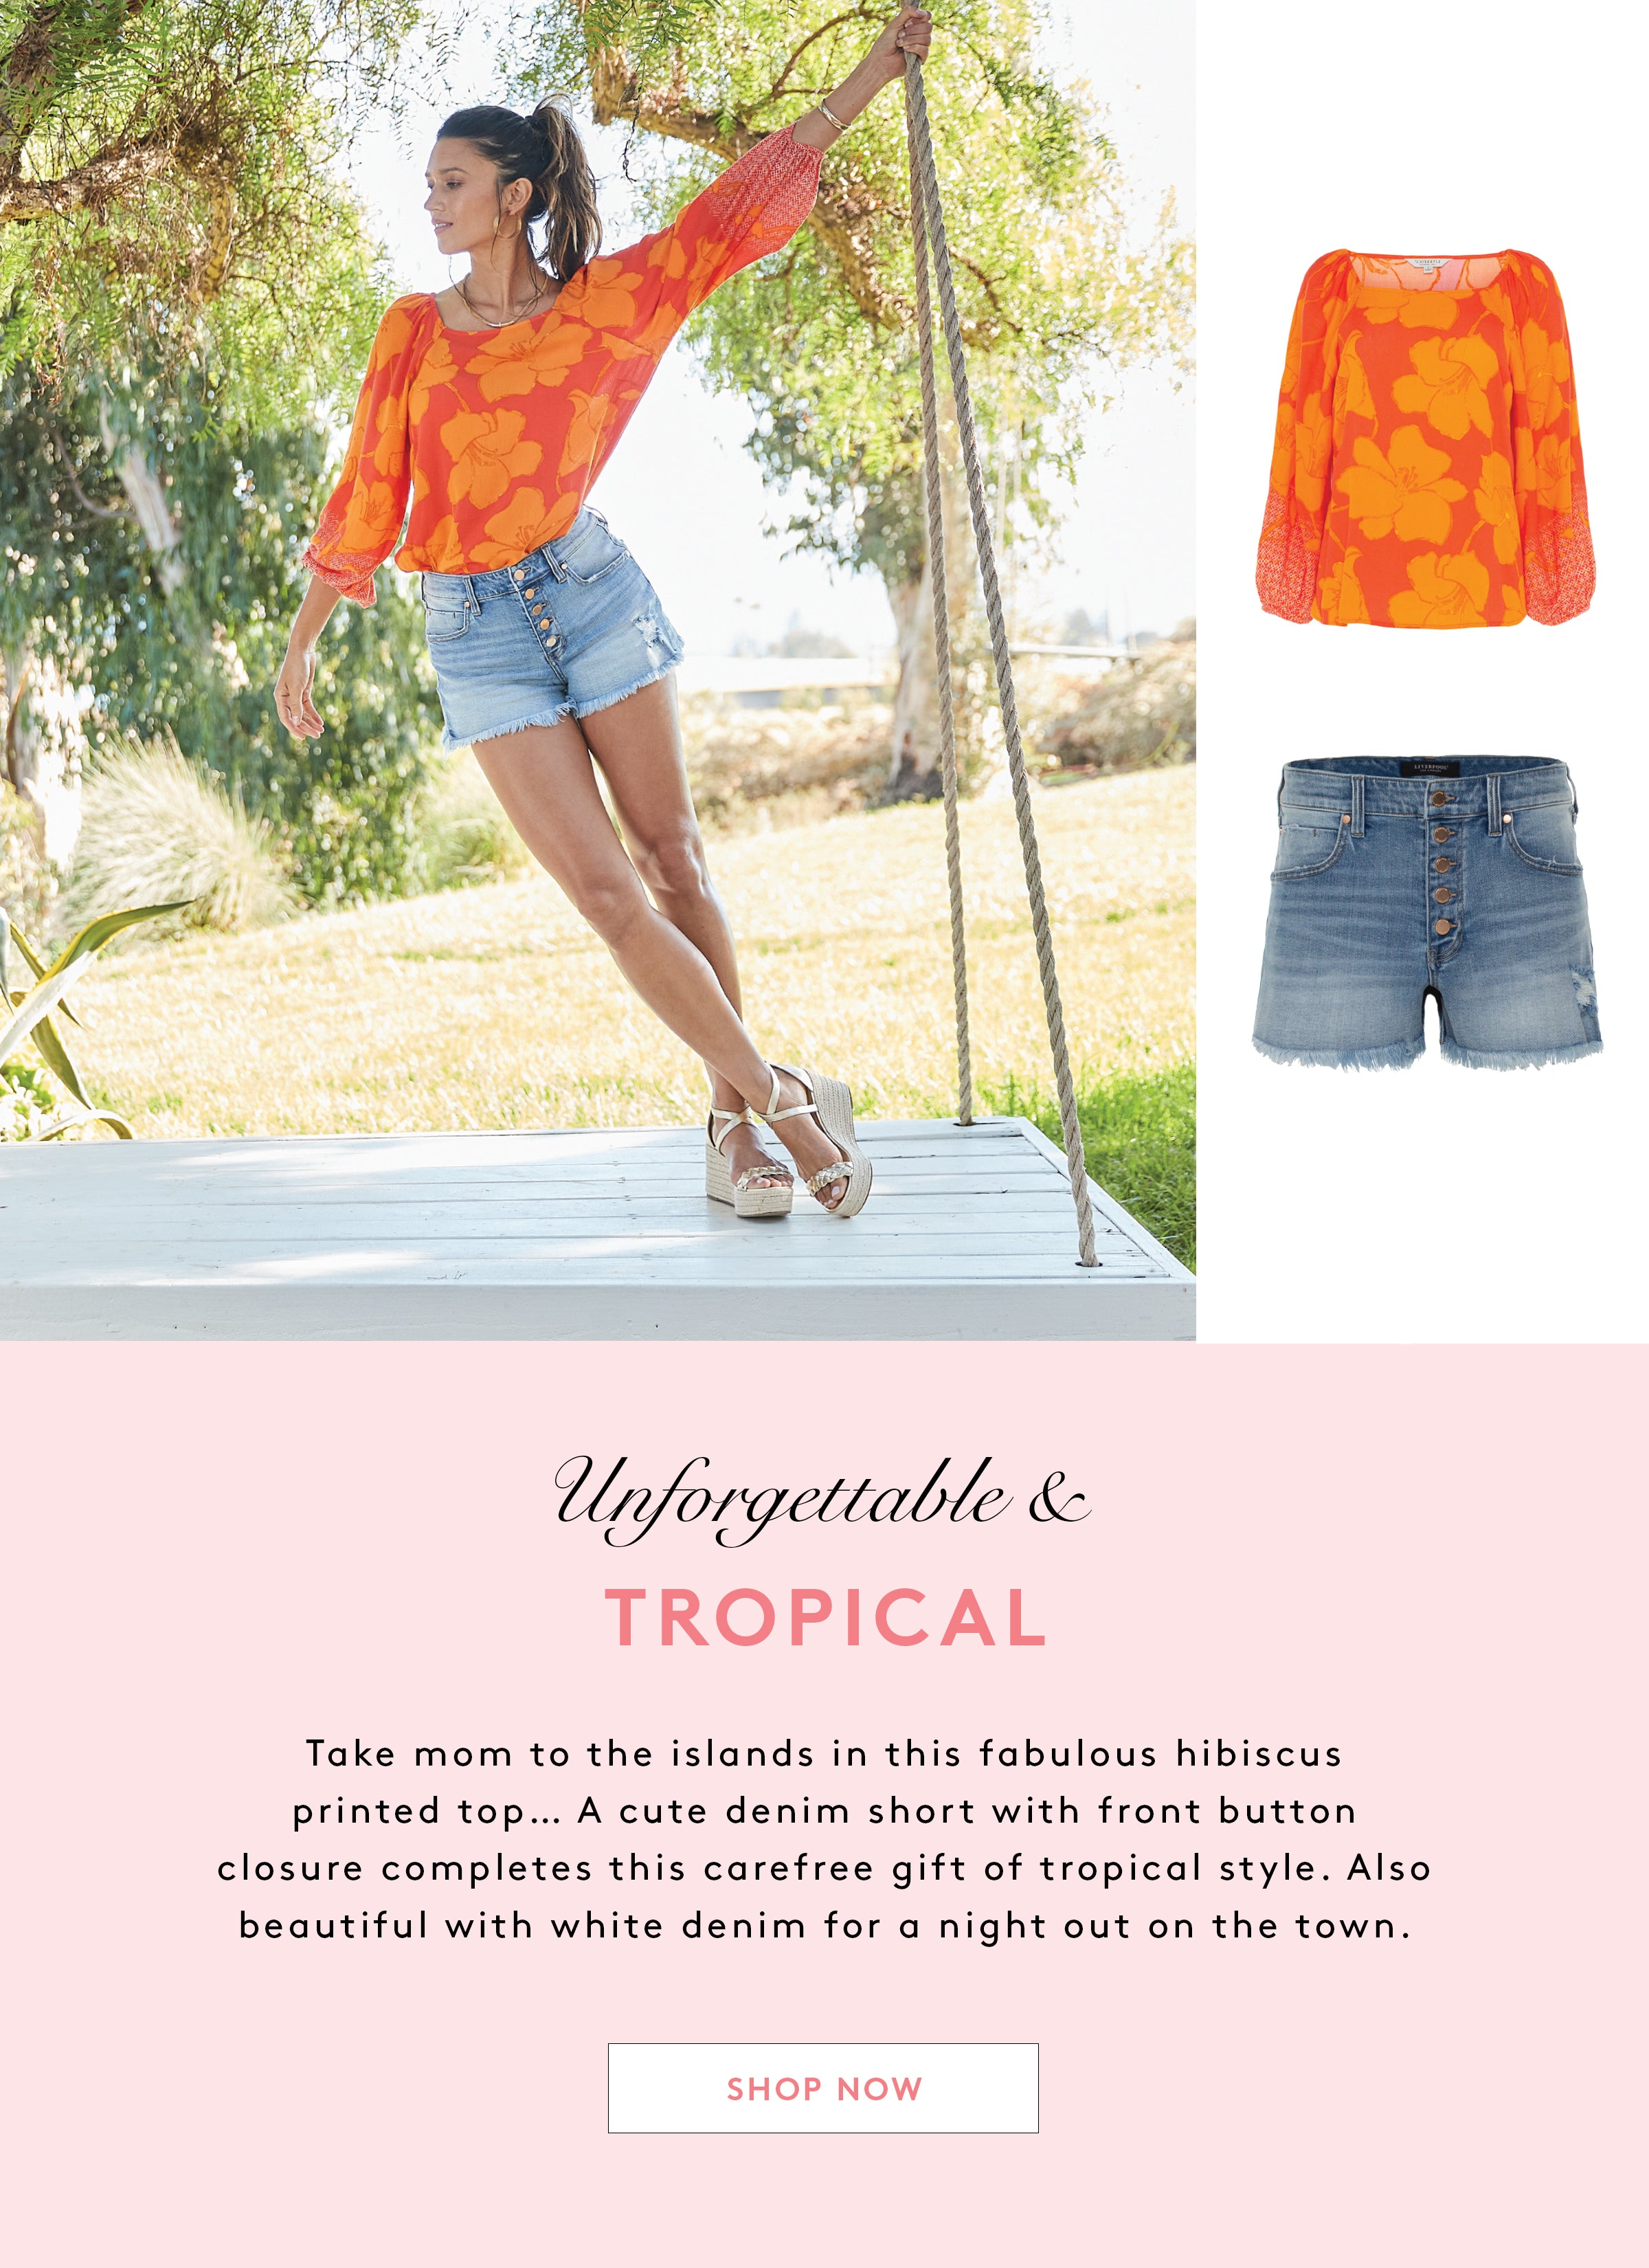 Unforgettable & TROPICAL Take mom to the islands in this fabulous hibiscus printed top... A cute denim short with front button closure completes this carefree gift of tropical style. Also beautiful with white denim for a night out on the town.